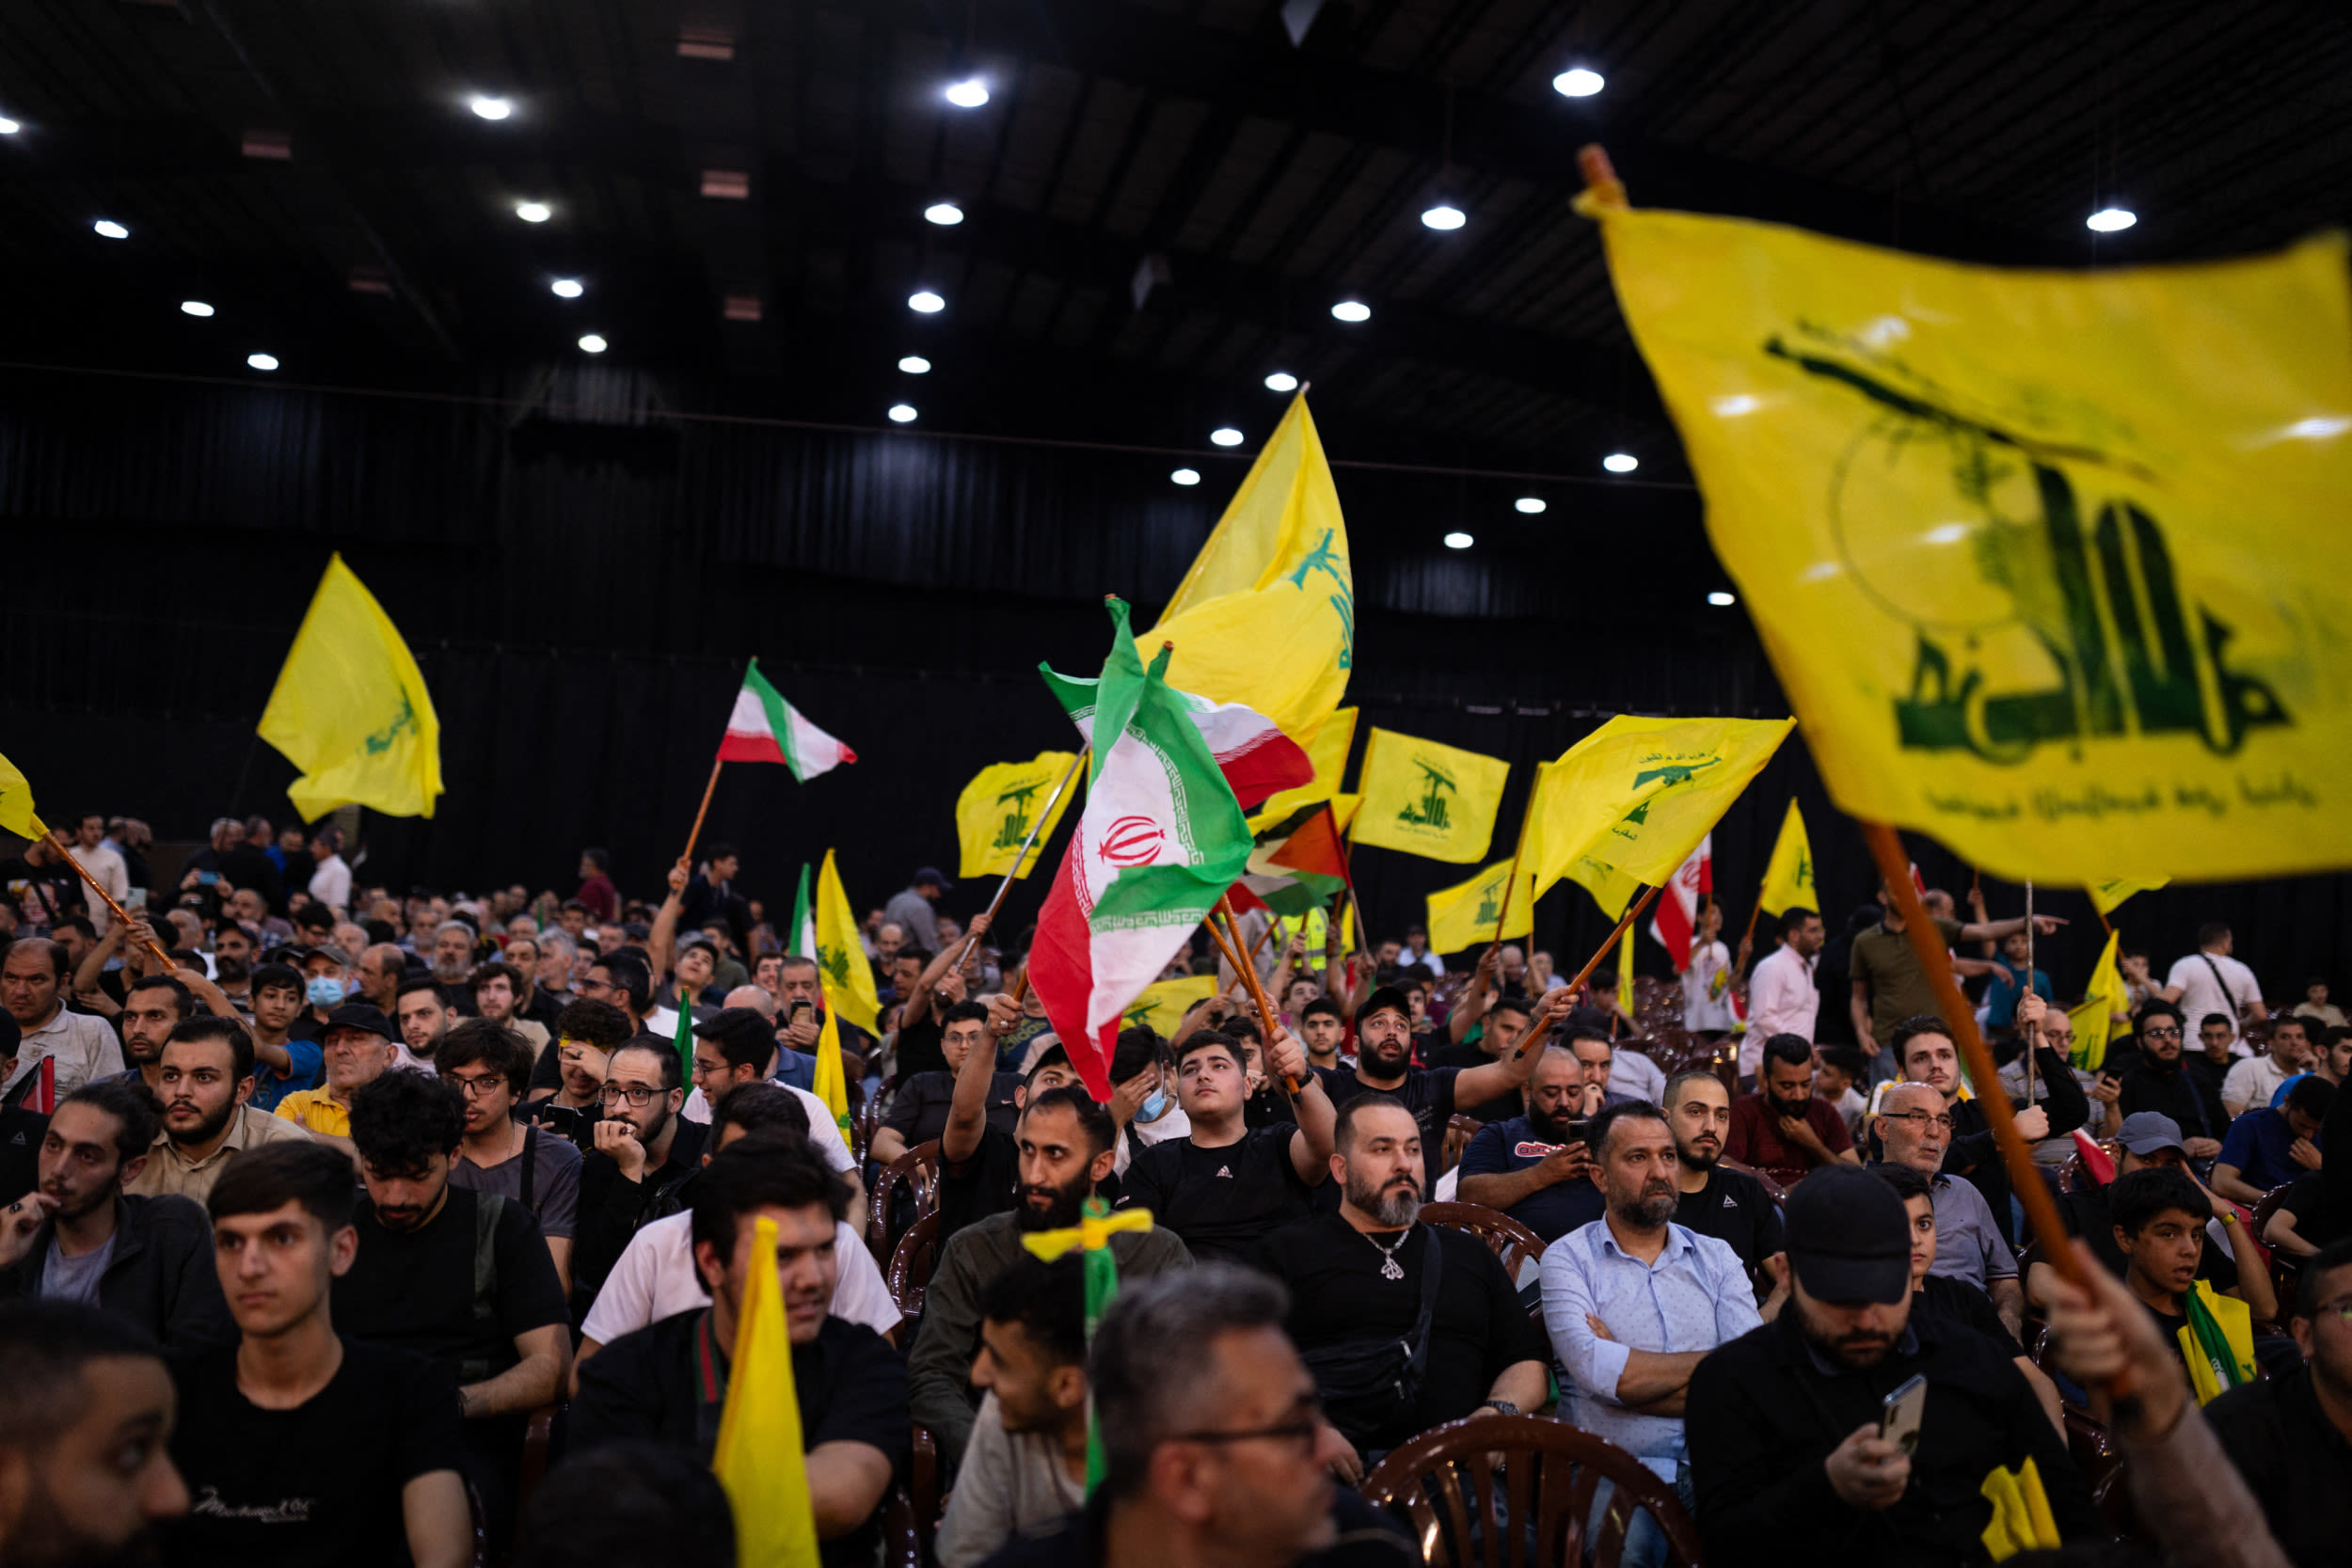 Israeli minister says "Lebanon should burn" after alleged Hezbollah attack